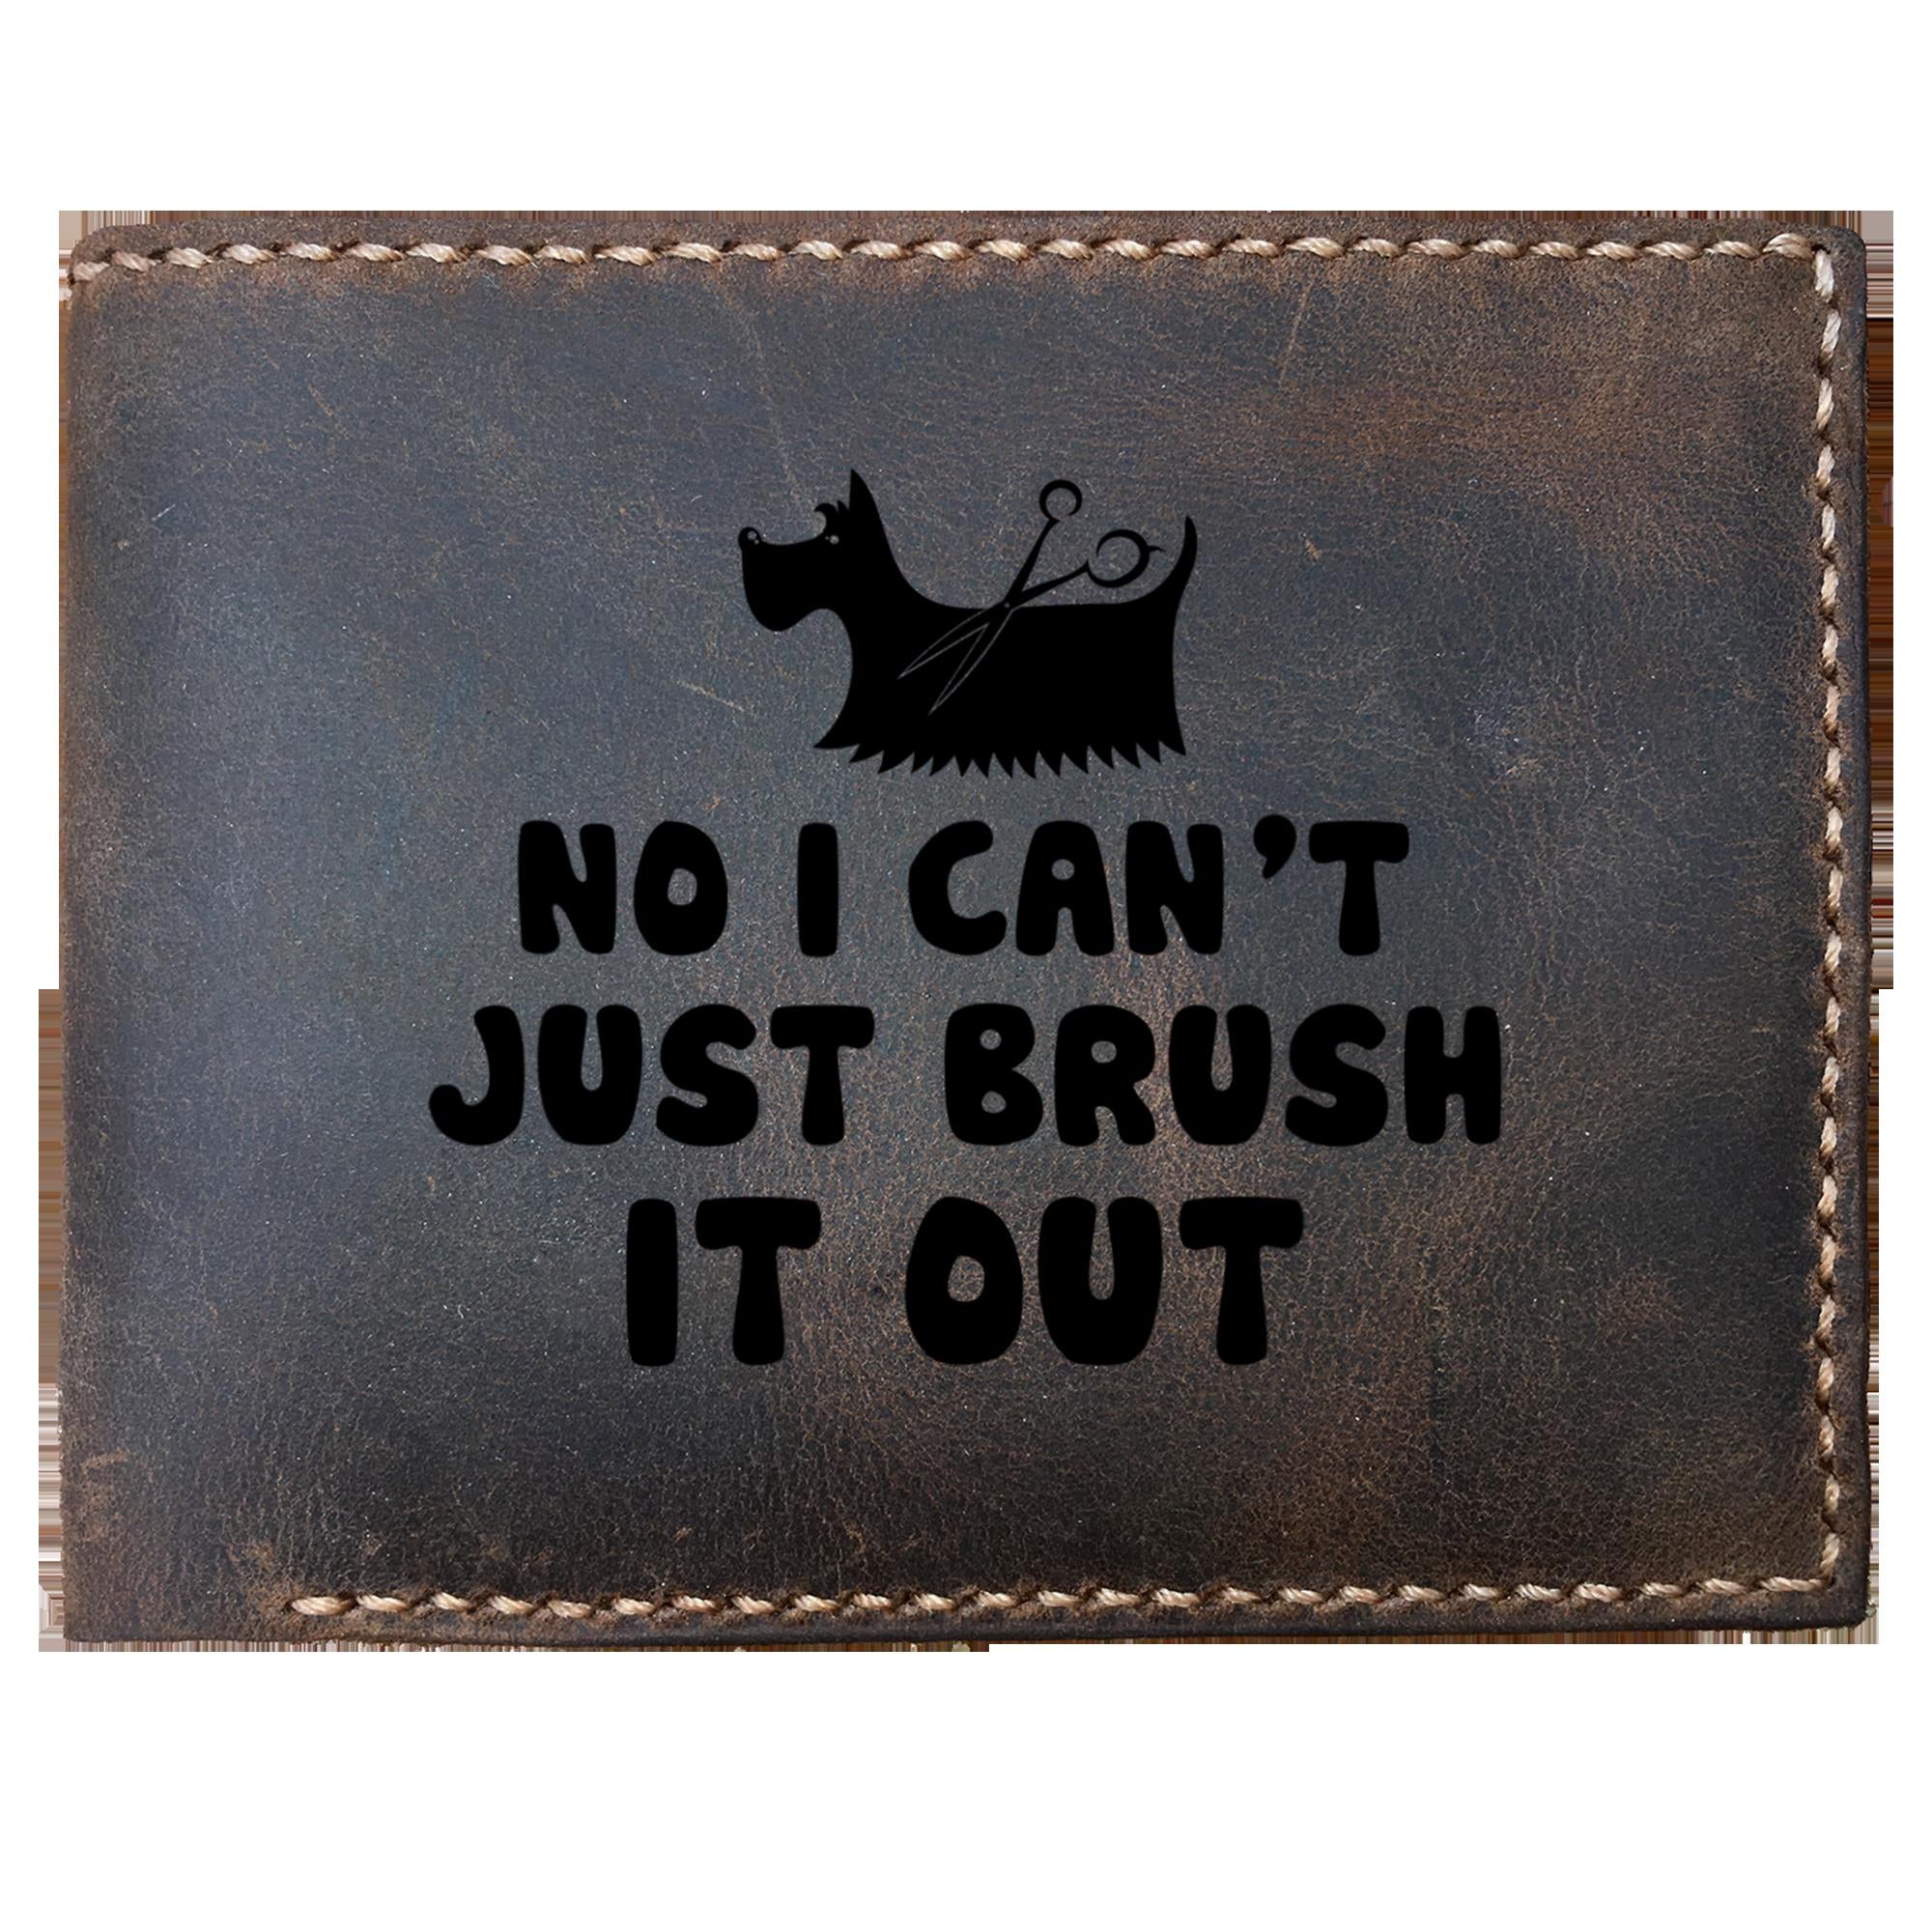 Skitongifts Funny Custom Laser Engraved Bifold Leather Wallet For Men, Fun Dog Groomer, No I Can't Just Brush It Out Grooming